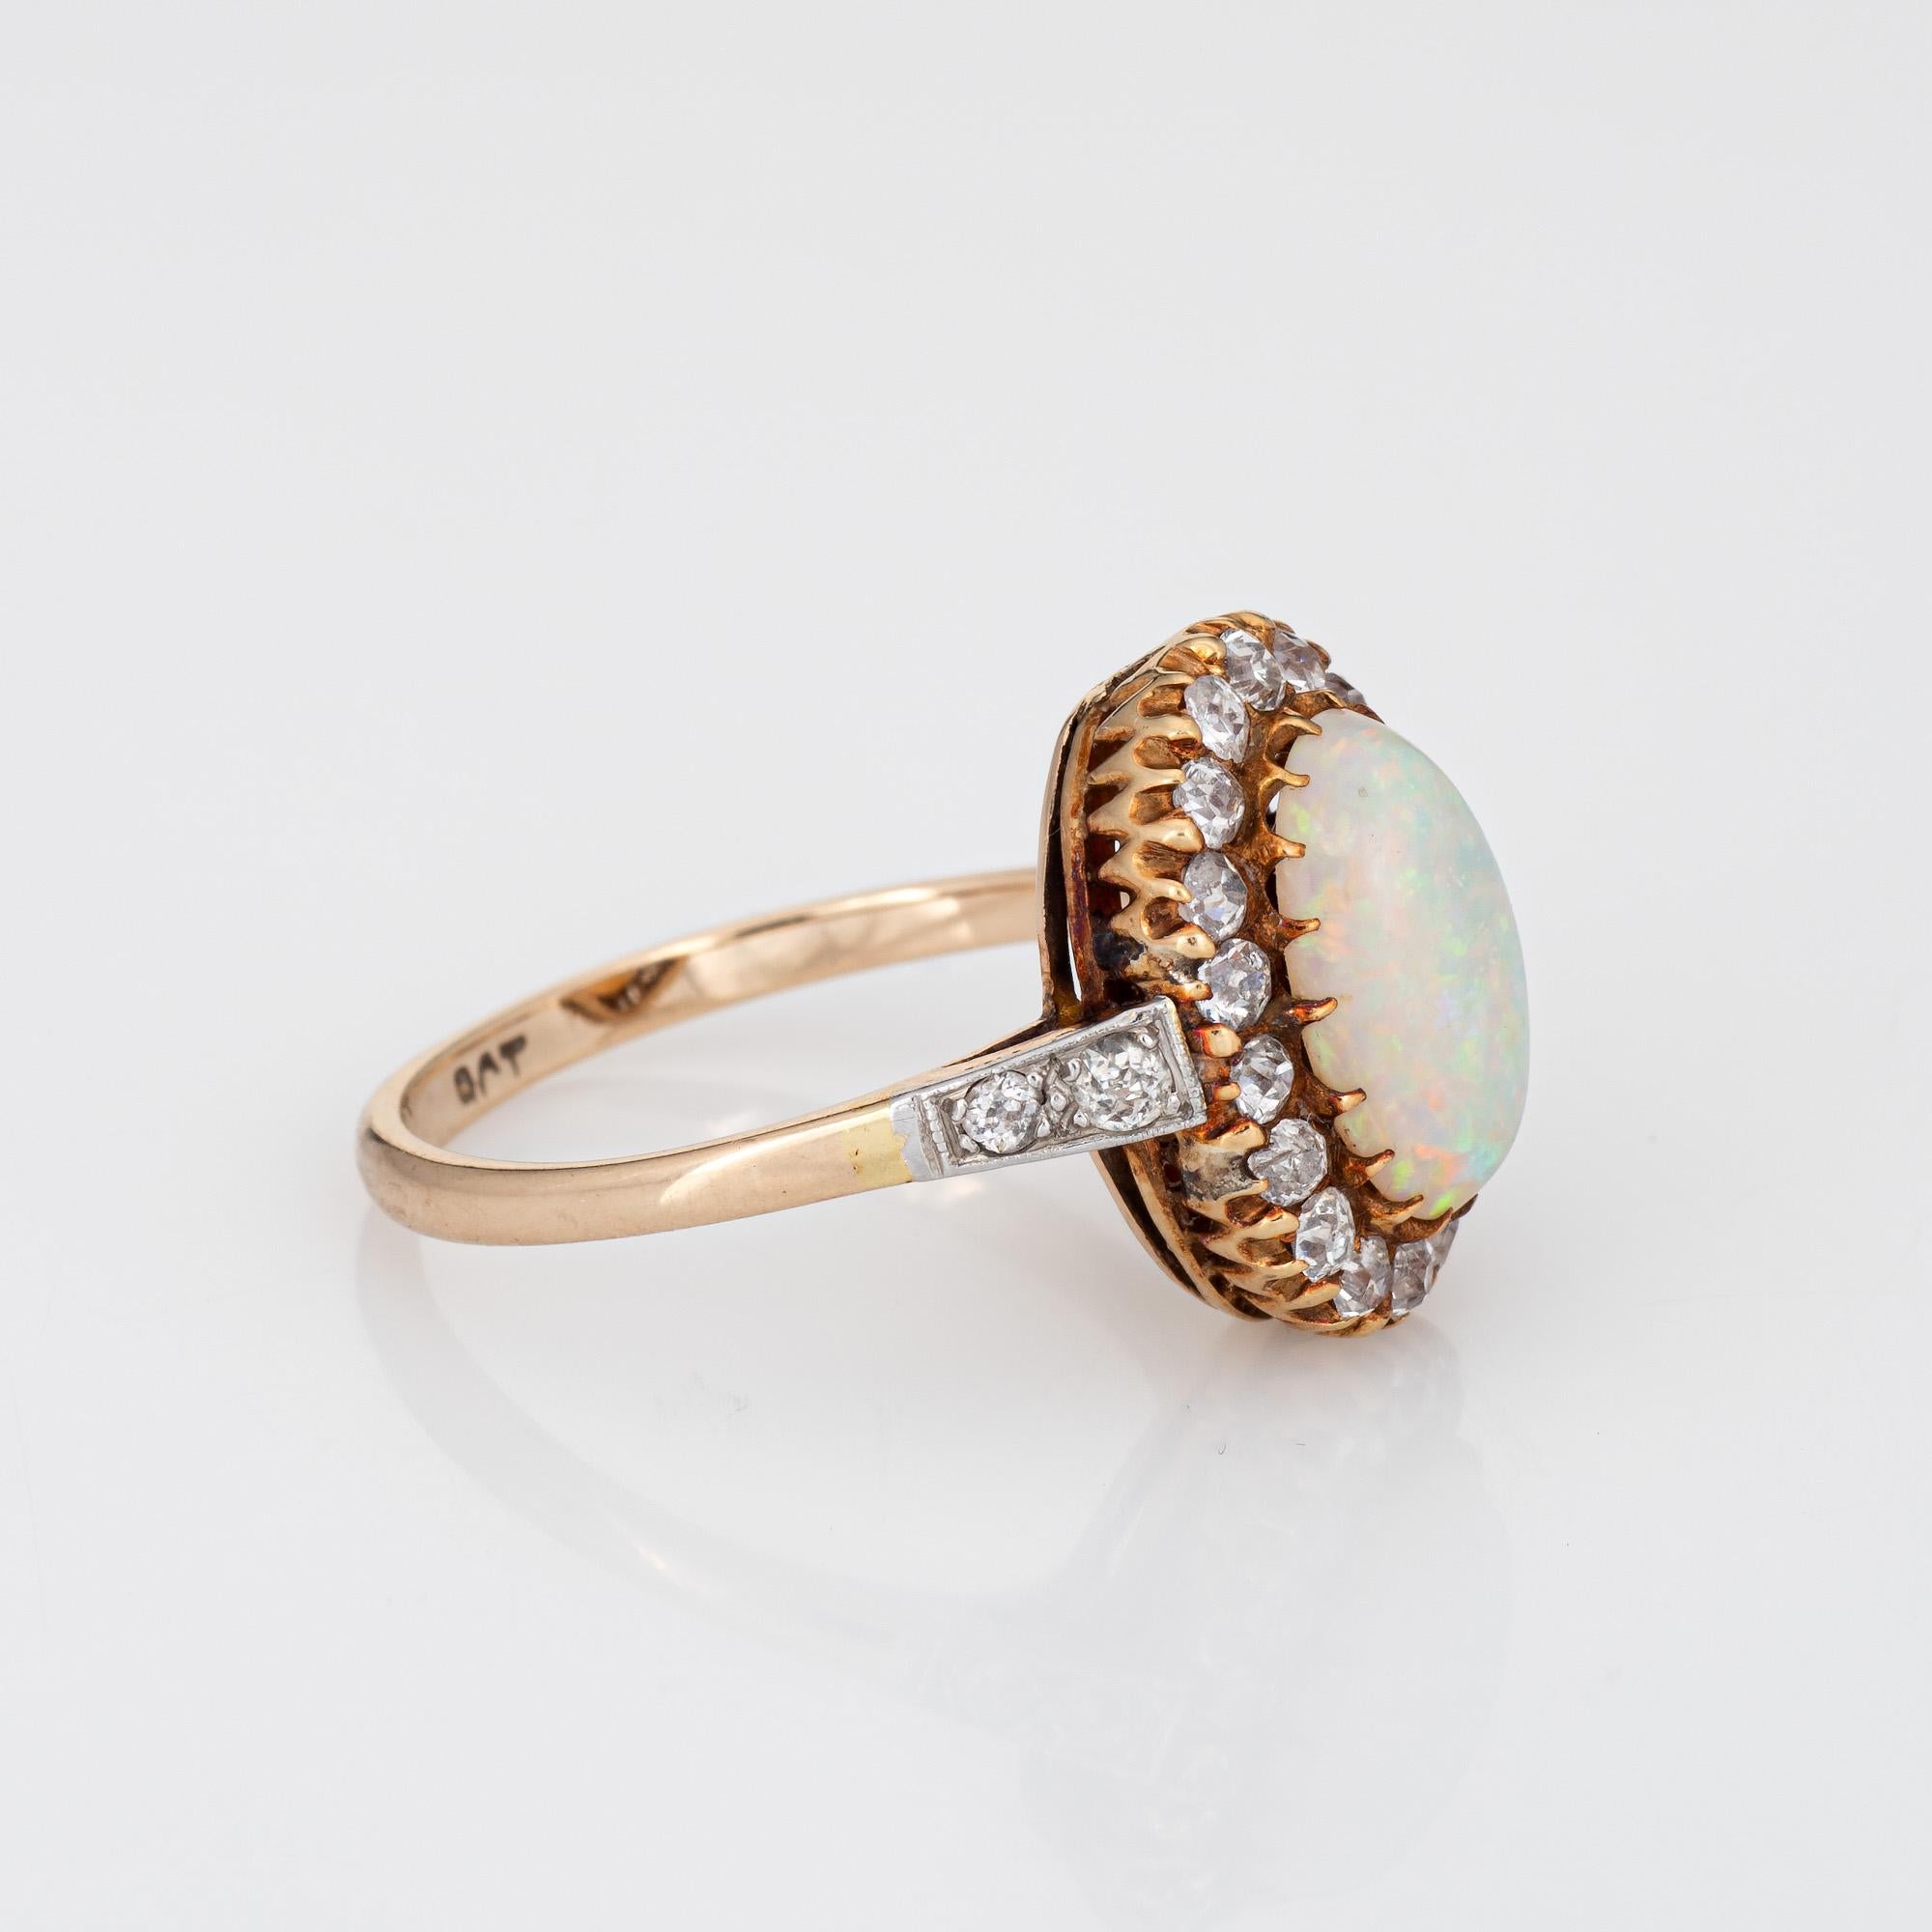 Cabochon Antique Victorian Opal Diamond Ring 9k Yellow Gold Oval Vintage Fine Jewelry For Sale